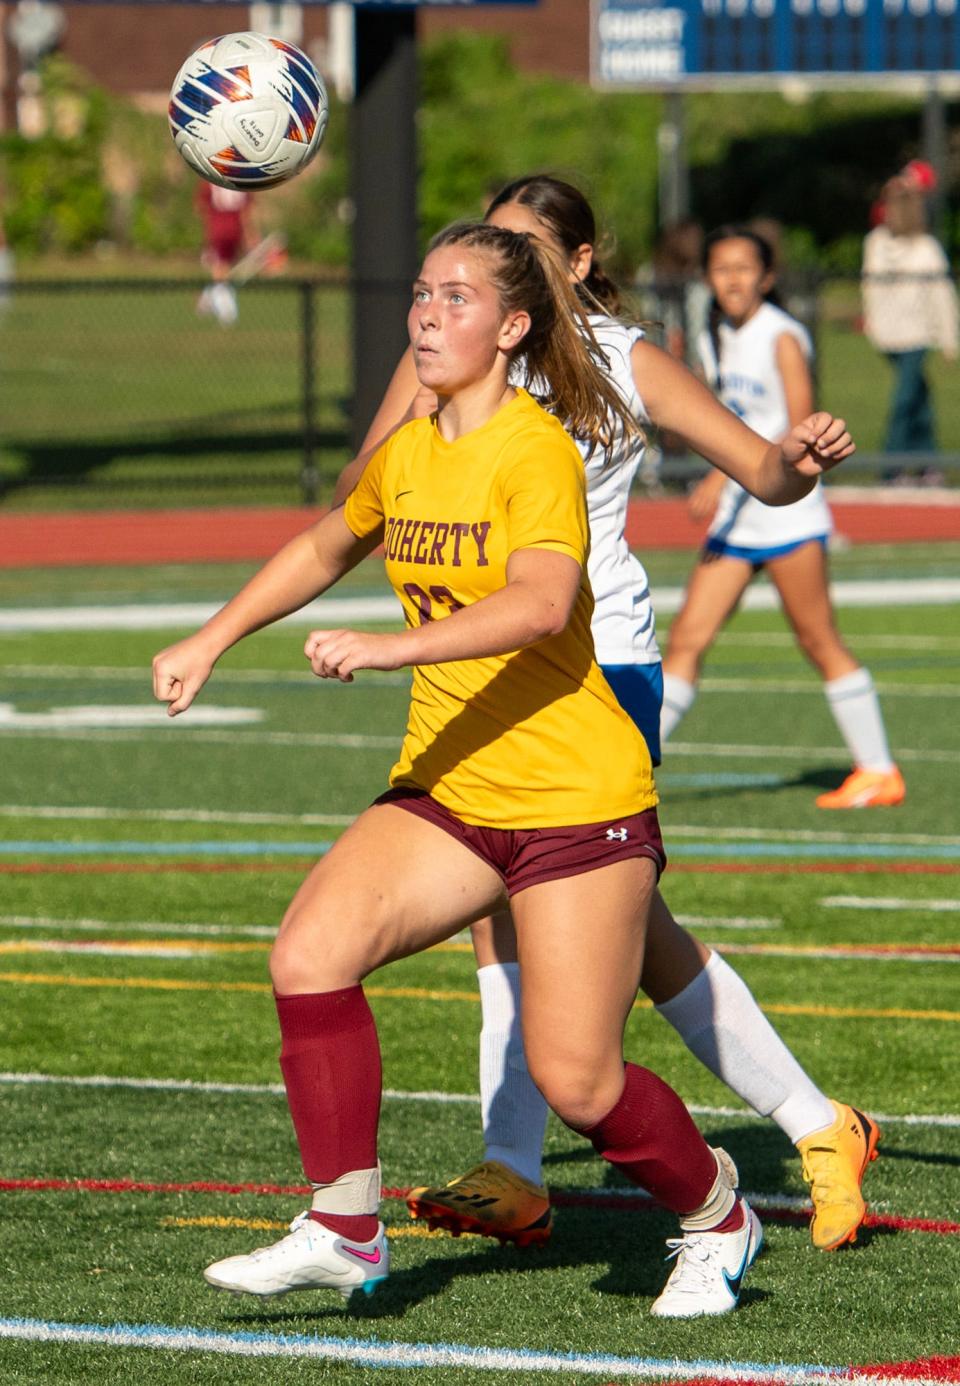 Doherty’s Brigid Murphy looks to control the ball against Worcester Tech on Wednesday.